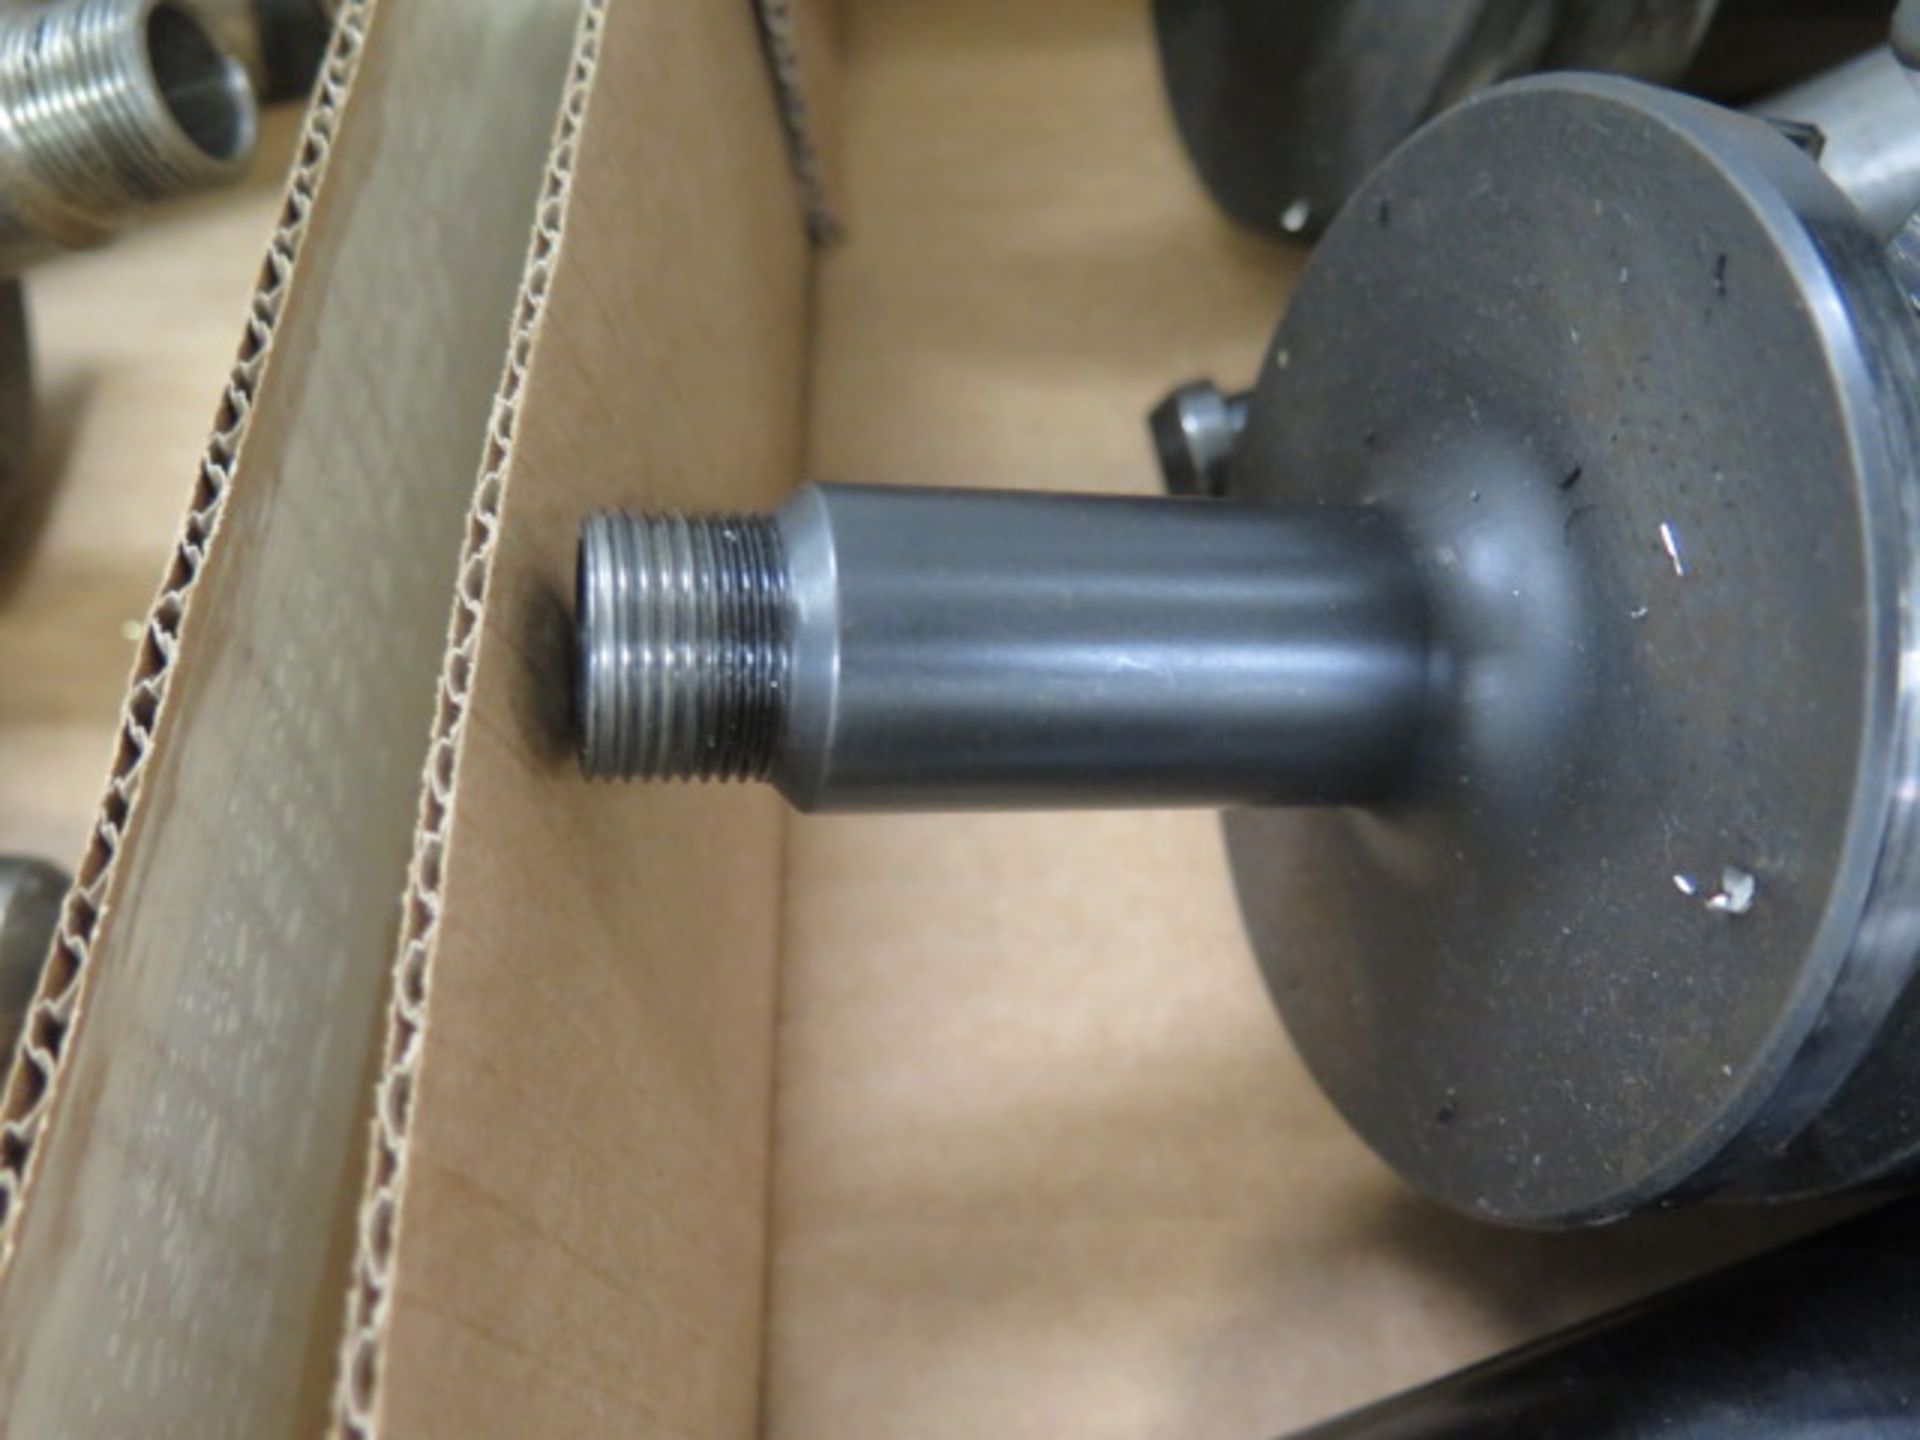 BT-50 Taper ER16 Collet chucks (6) (SOLD AS-IS - NO WARRANTY) (Located @ 2229 Ringwood Ave. San Jose - Image 6 of 6